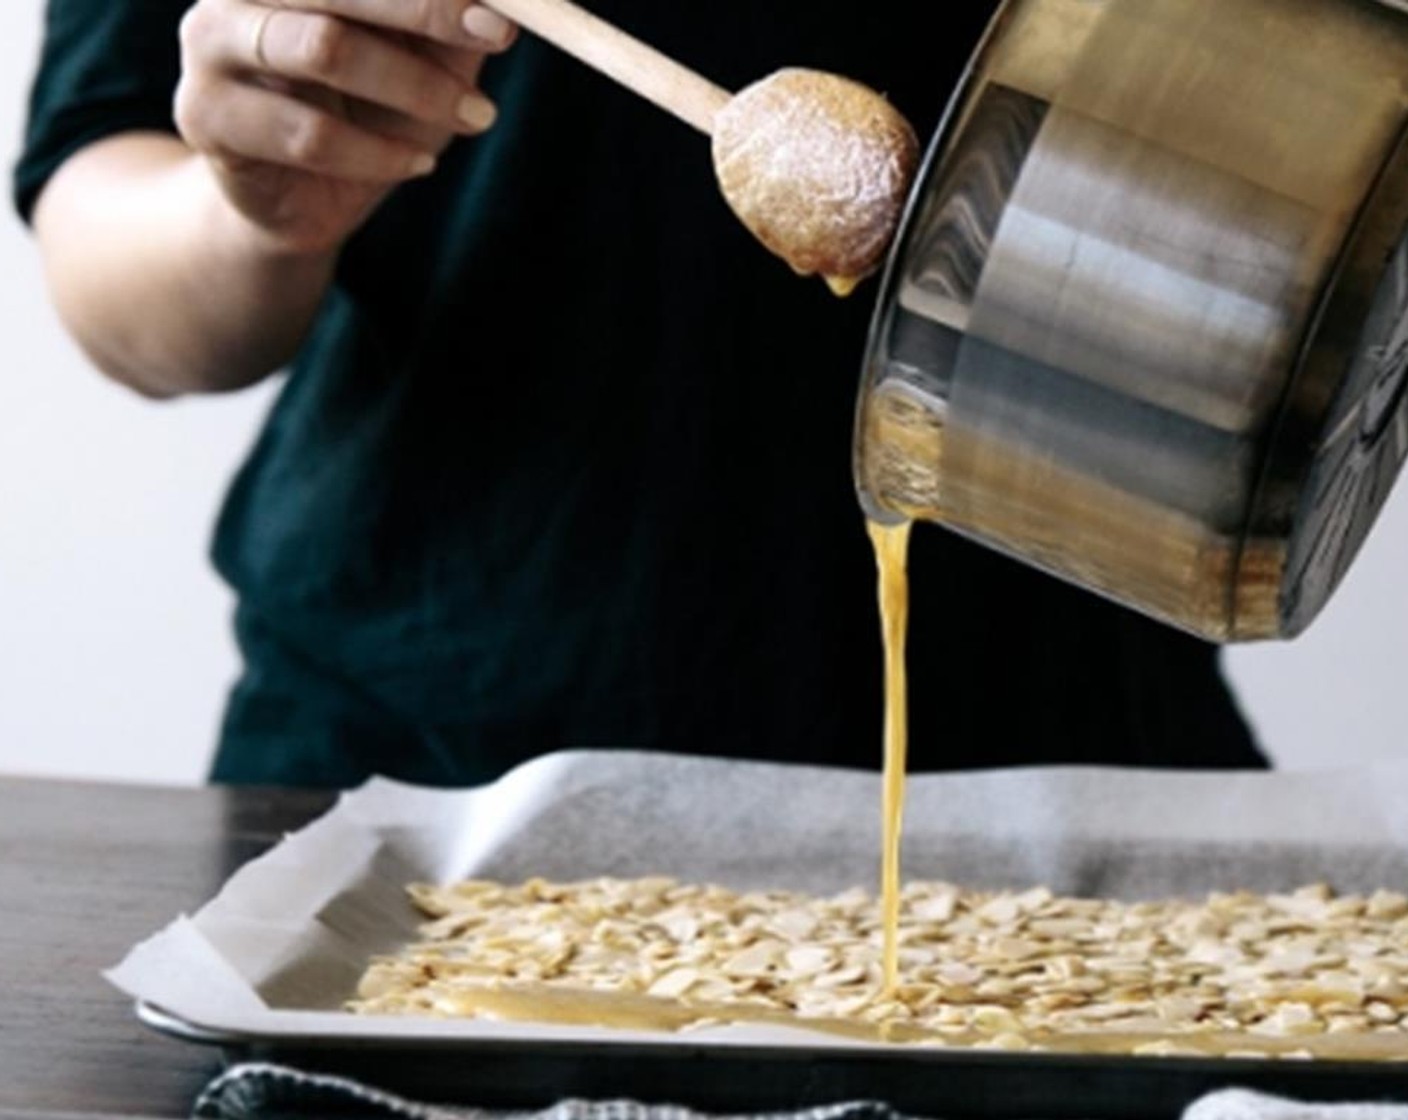 step 2 Pour the hot honey over the almonds, ensure all the almonds are coated with the honey, then set aside to cool.